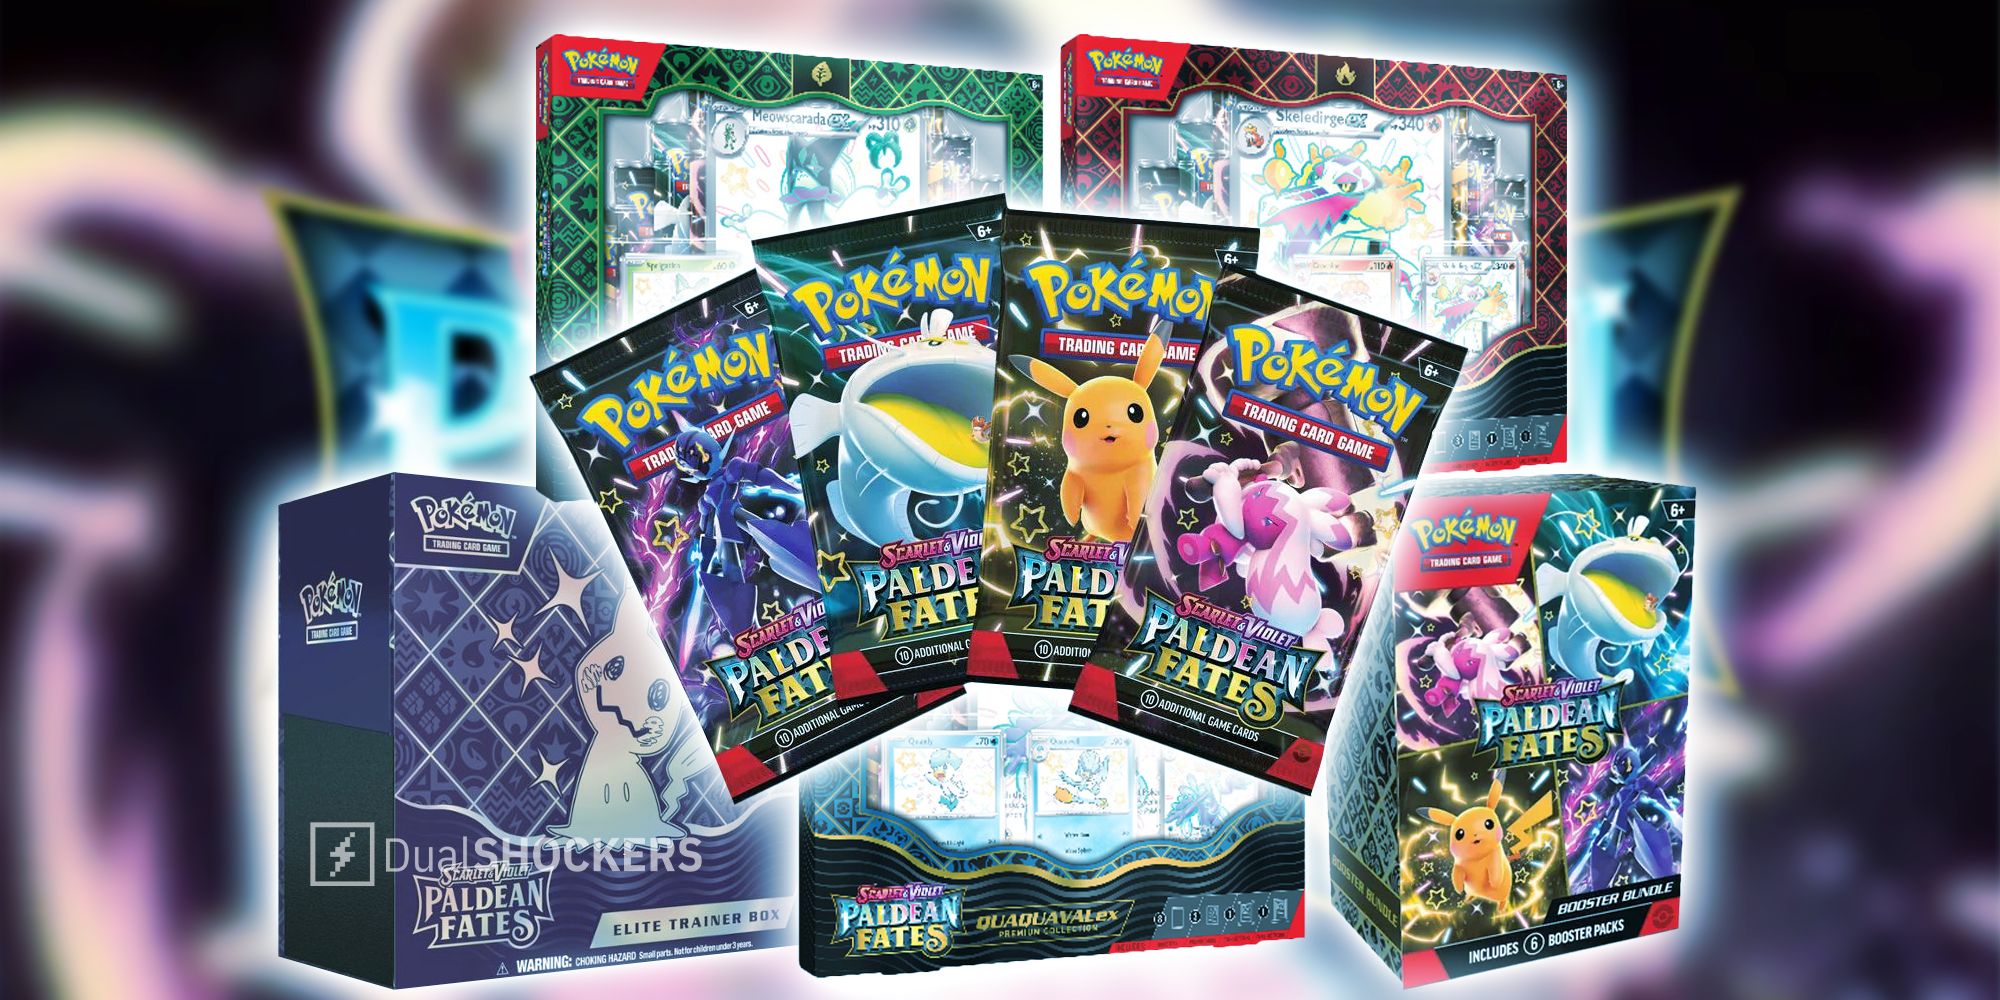 Paldean Fates Pokemon TCG Set with Elite Trainer Box, booster packs